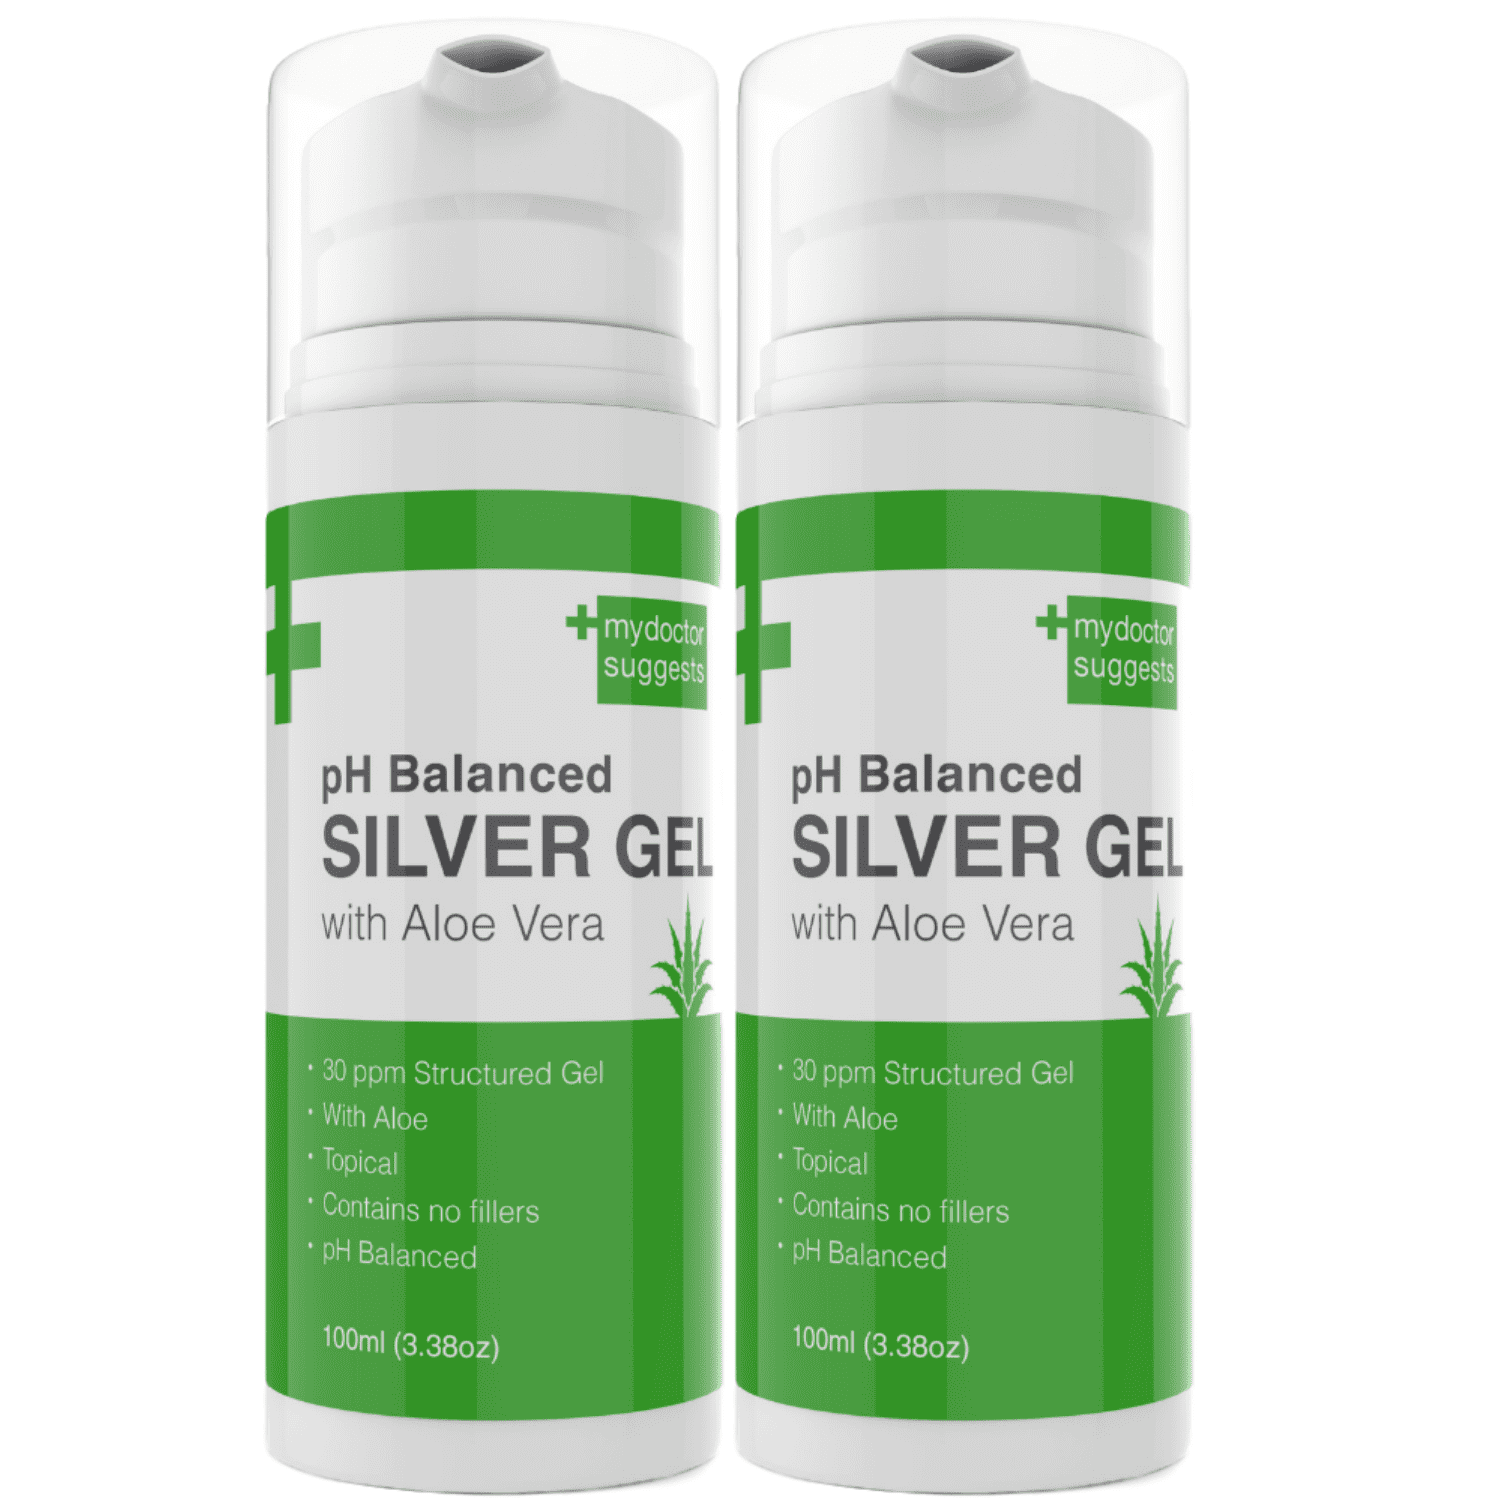 Silver Gel Ph Balanced Silver Gel With Aloe Vera Strong 30ppm Silver Gel In A Easy Pump Container Pack Of 2 Walmart Com Walmart Com